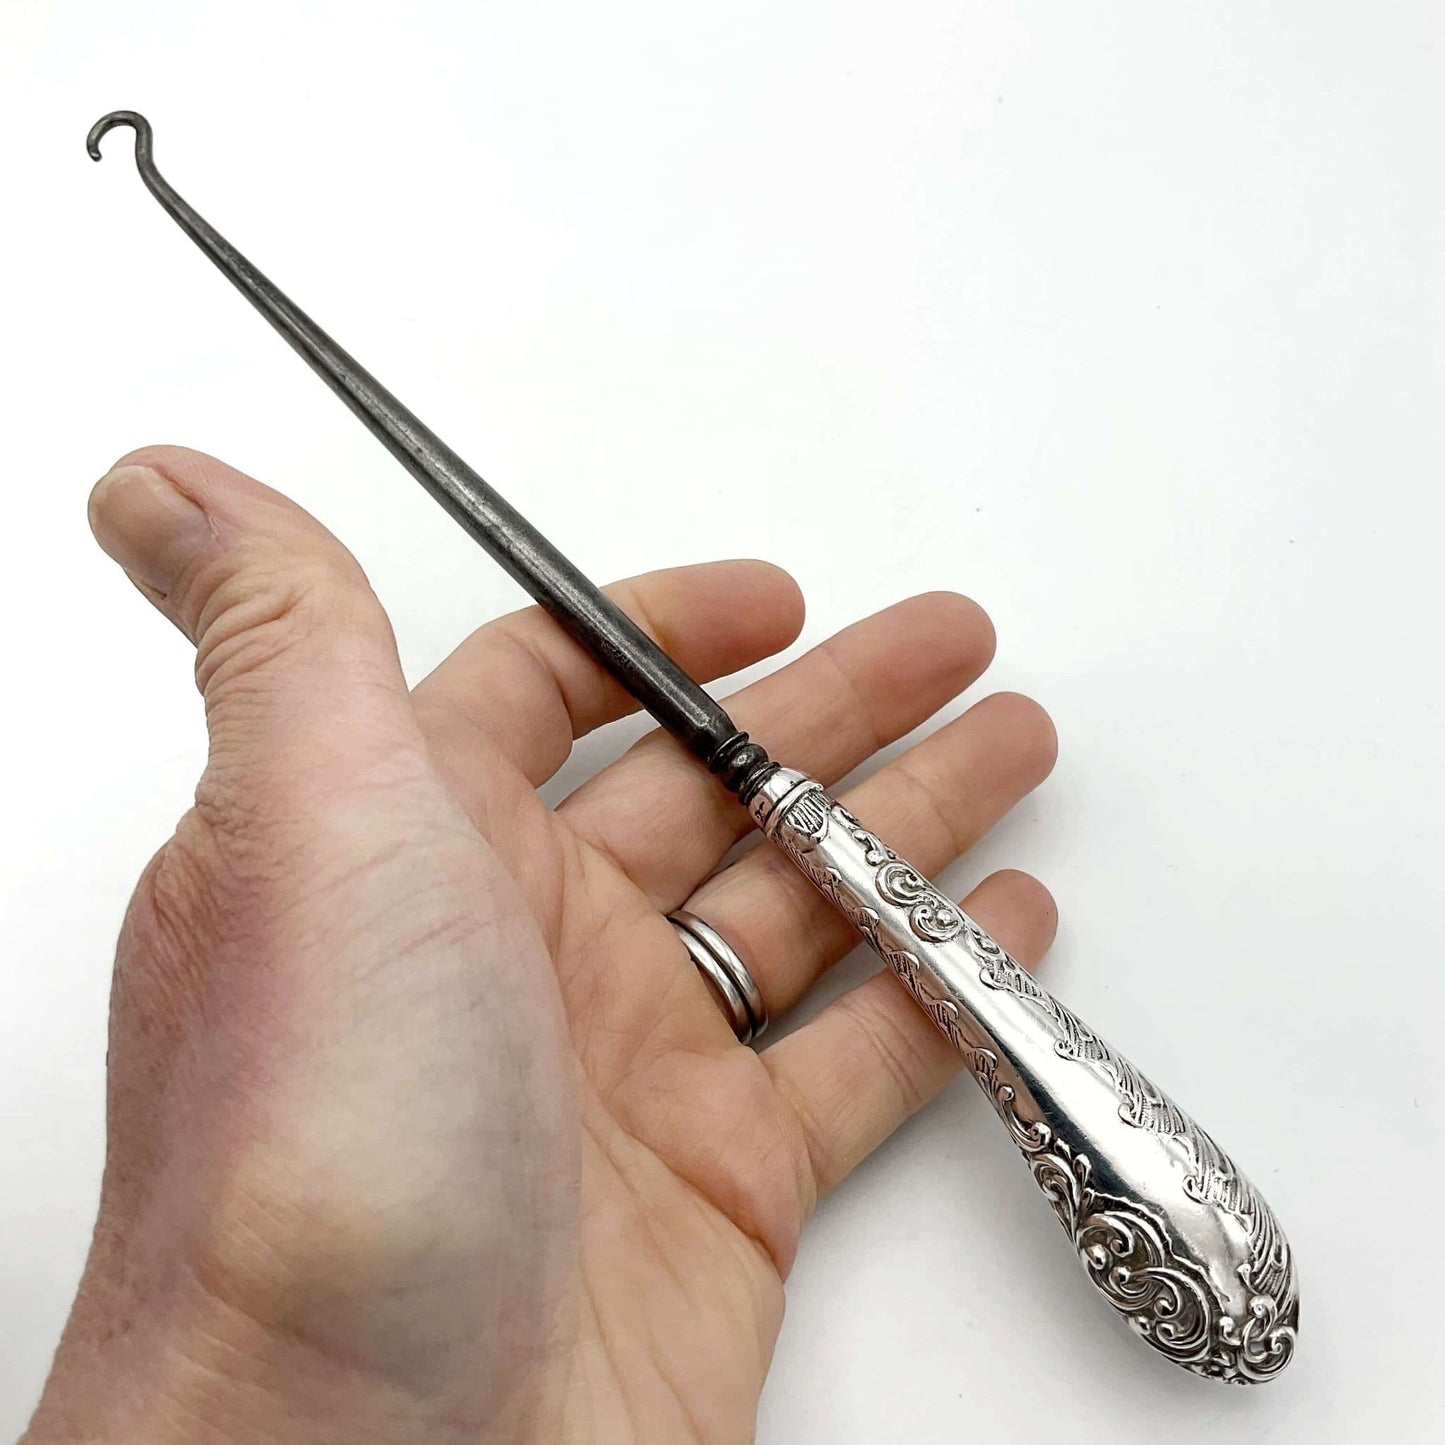 Antique Baroque style button hook - 1897 - .925 silver - Barnsley - England  - Late 19th century - Catawiki